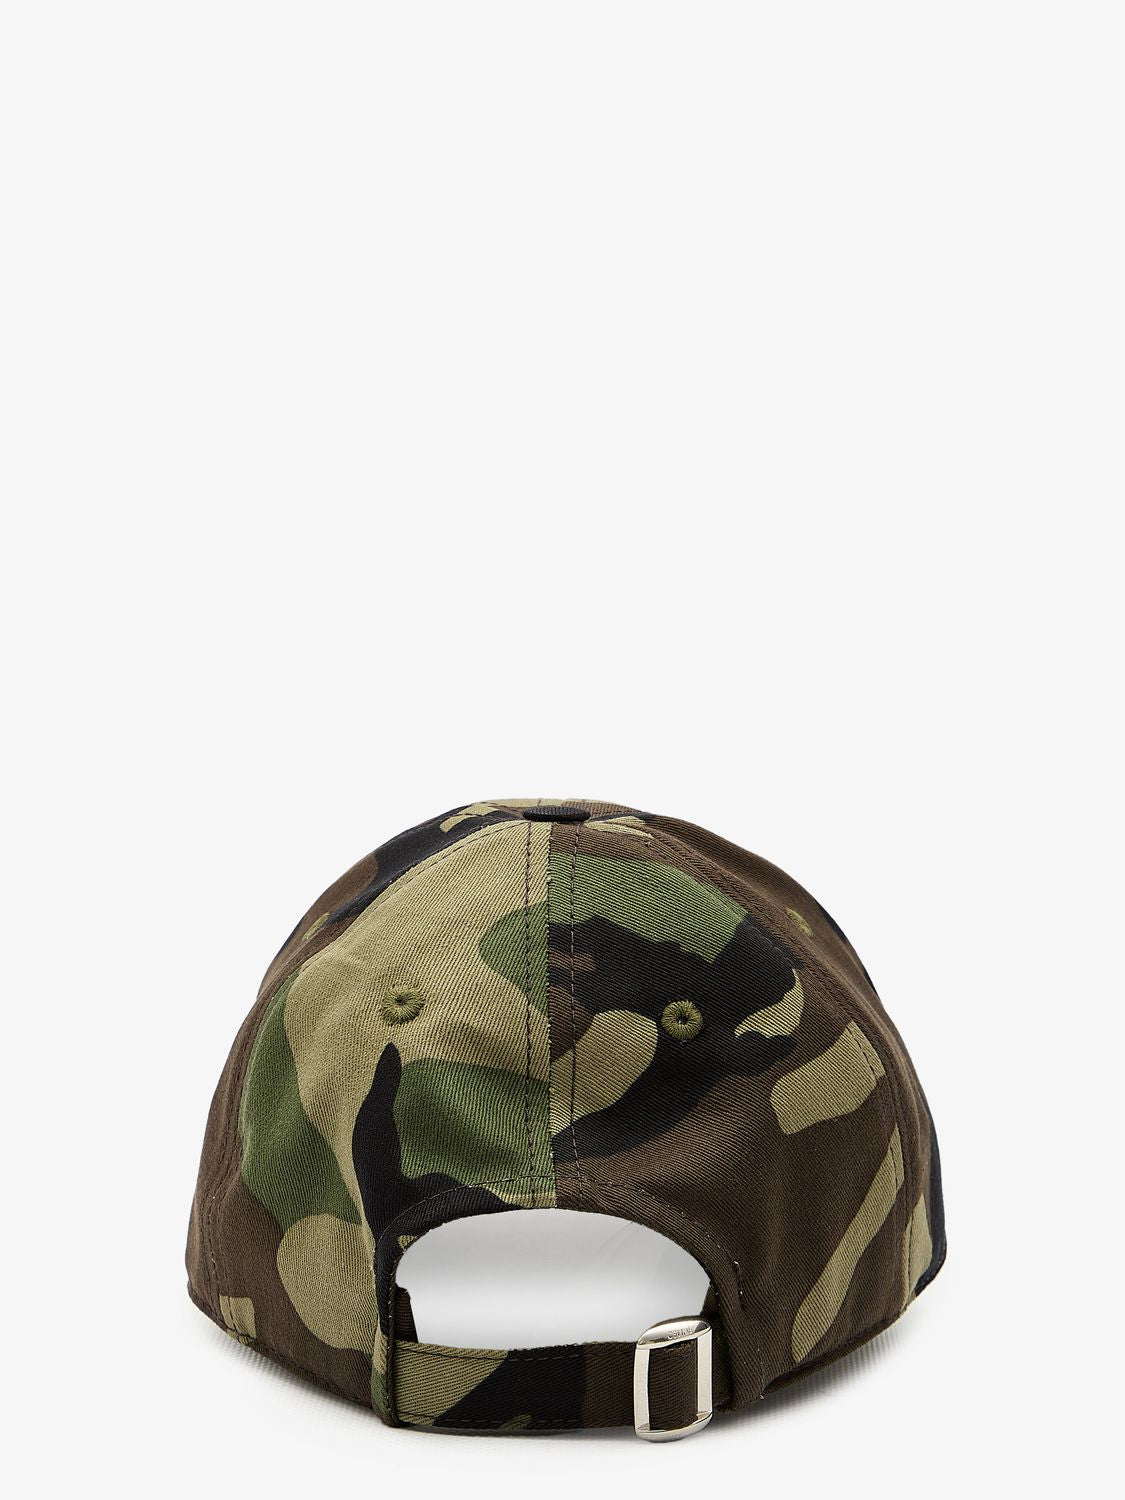 Camouflage Baseball Cap with Embroidered Logo - Men's